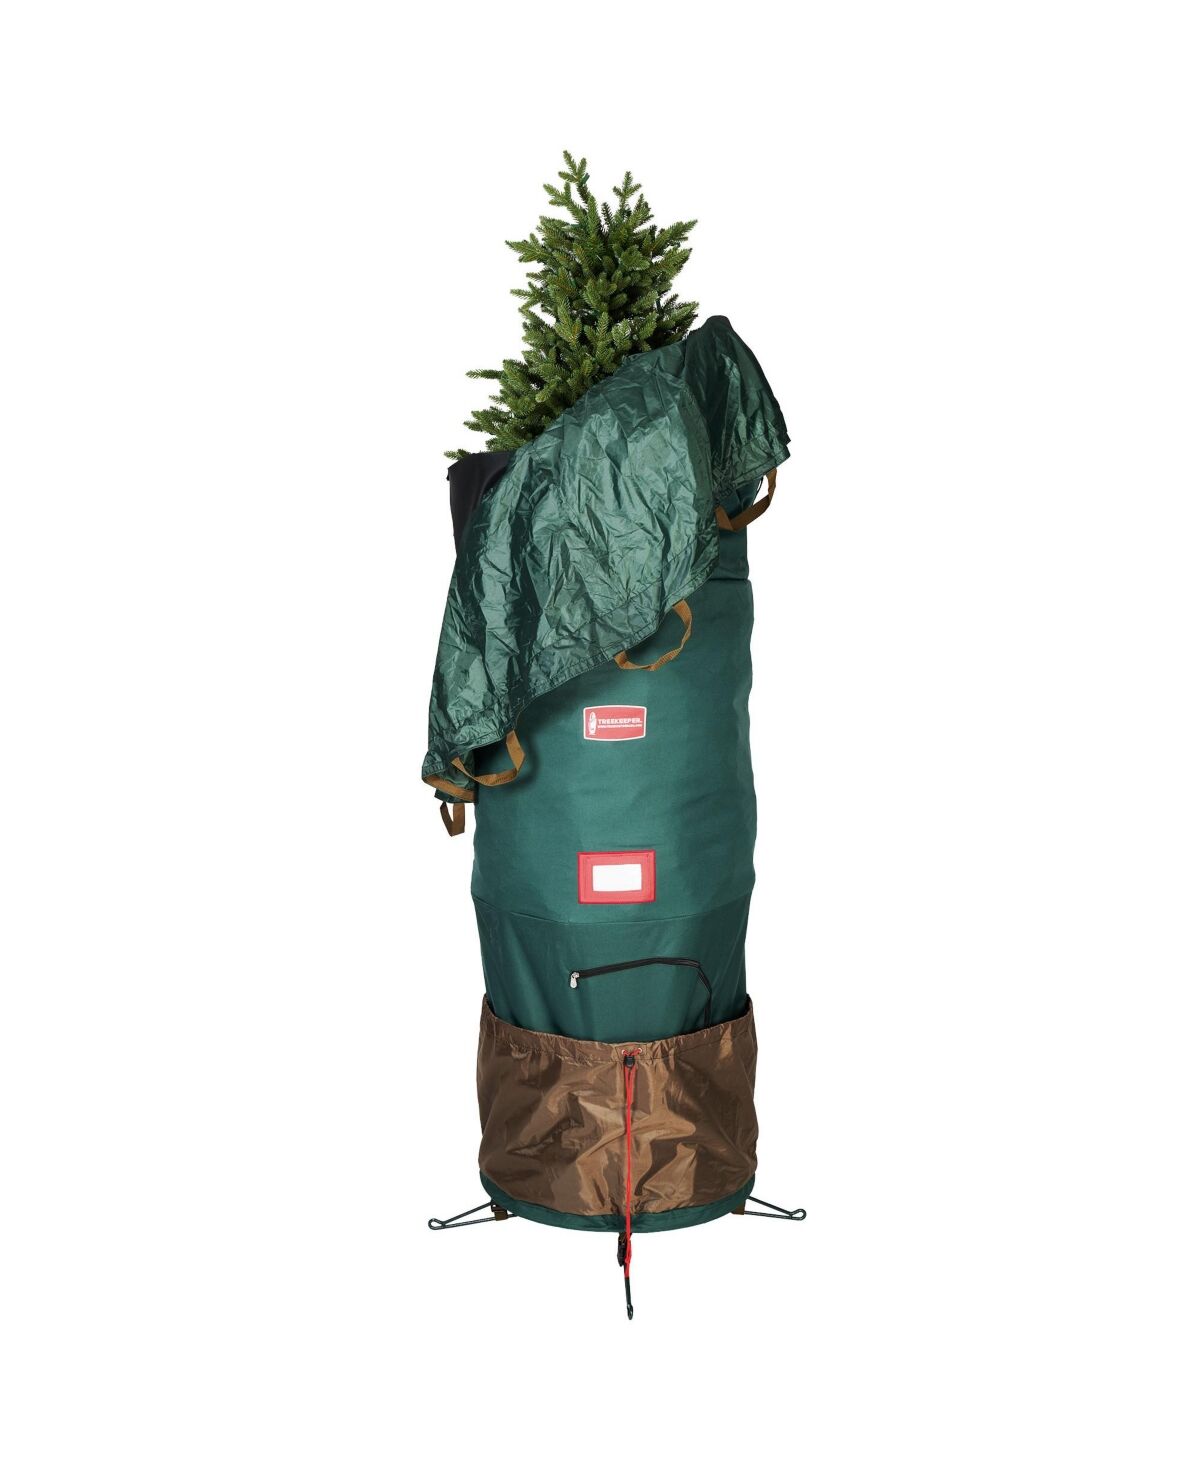 Northlight Large Upright Christmas Tree Protective Storage Bag for Artificial Trees, 9.5' - Green